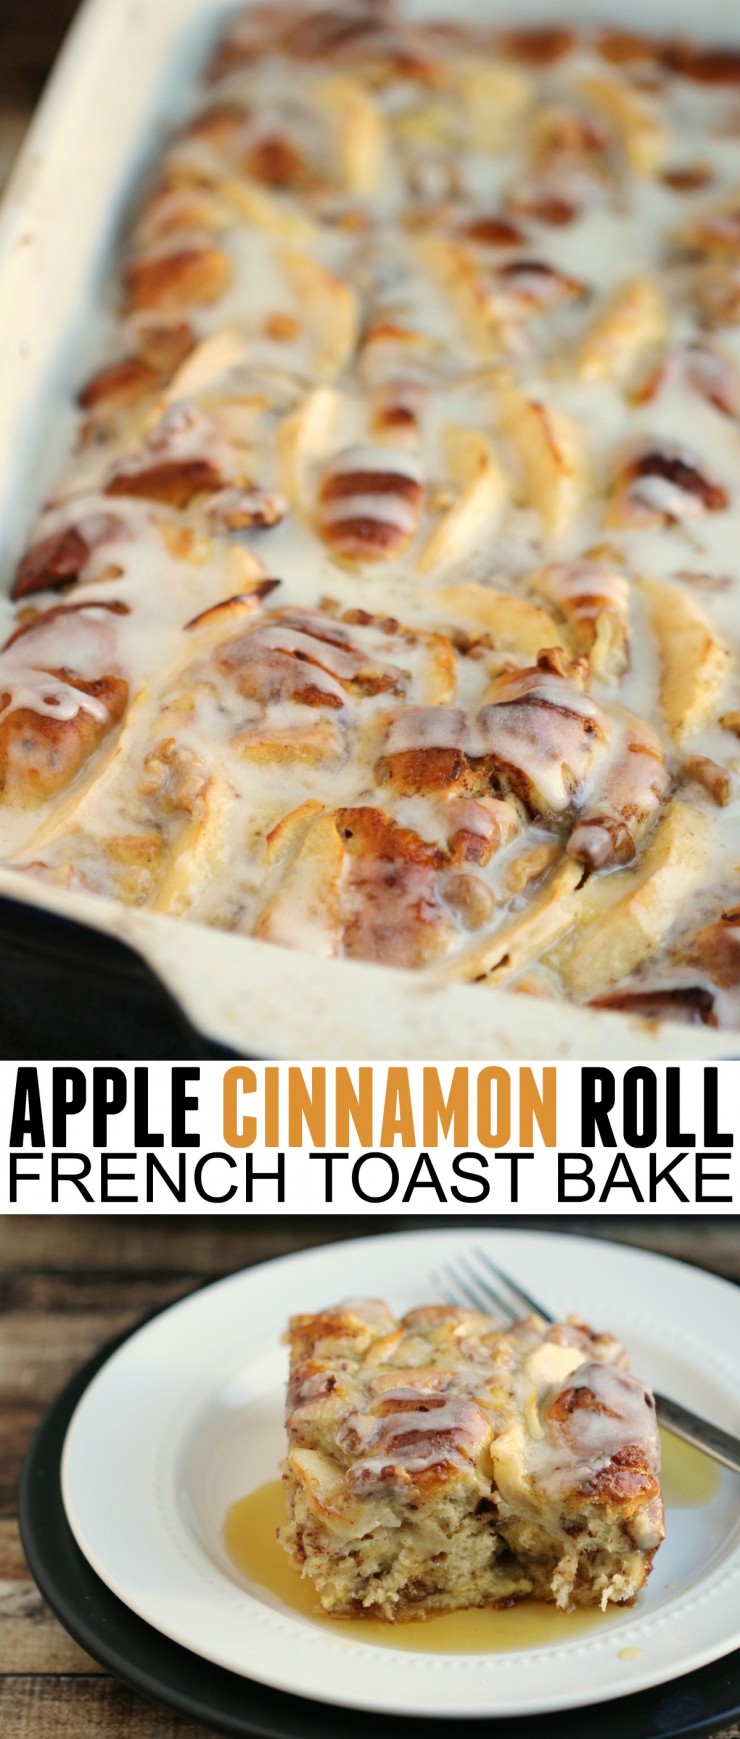 If you are looking for an easy brunch recipe or Christmas morning breakfast casserole, this Apple Cinnamon Roll French Toast Bake is both easy and delicious